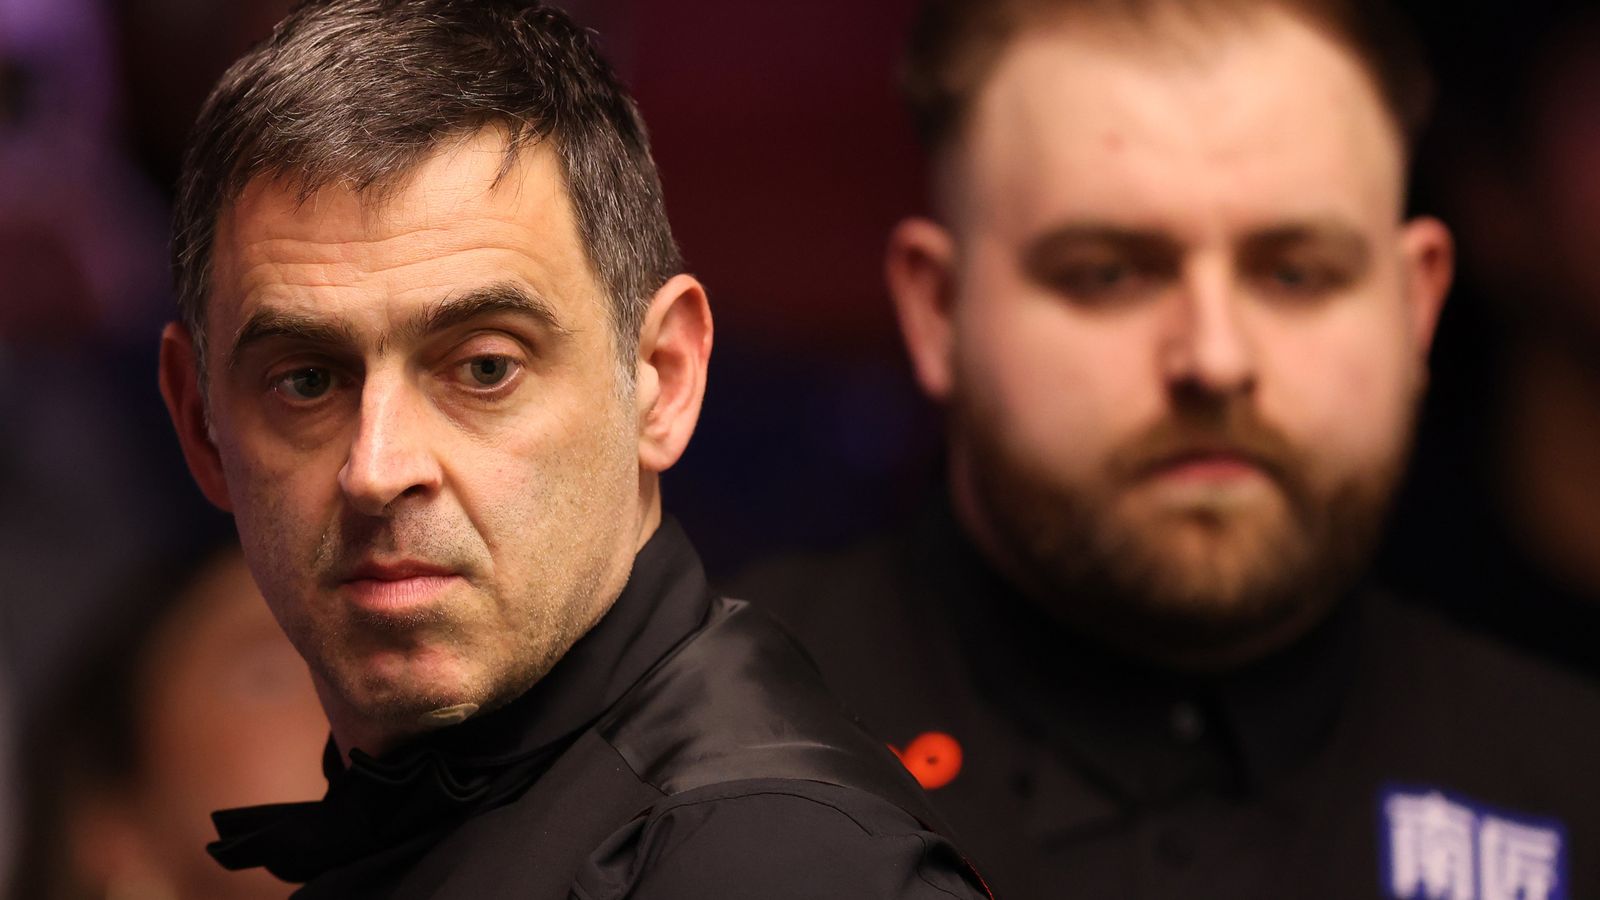 World Snooker Championship: Ronnie O’Sullivan on brink of second round after dominant start against Jackson Page | Snooker News